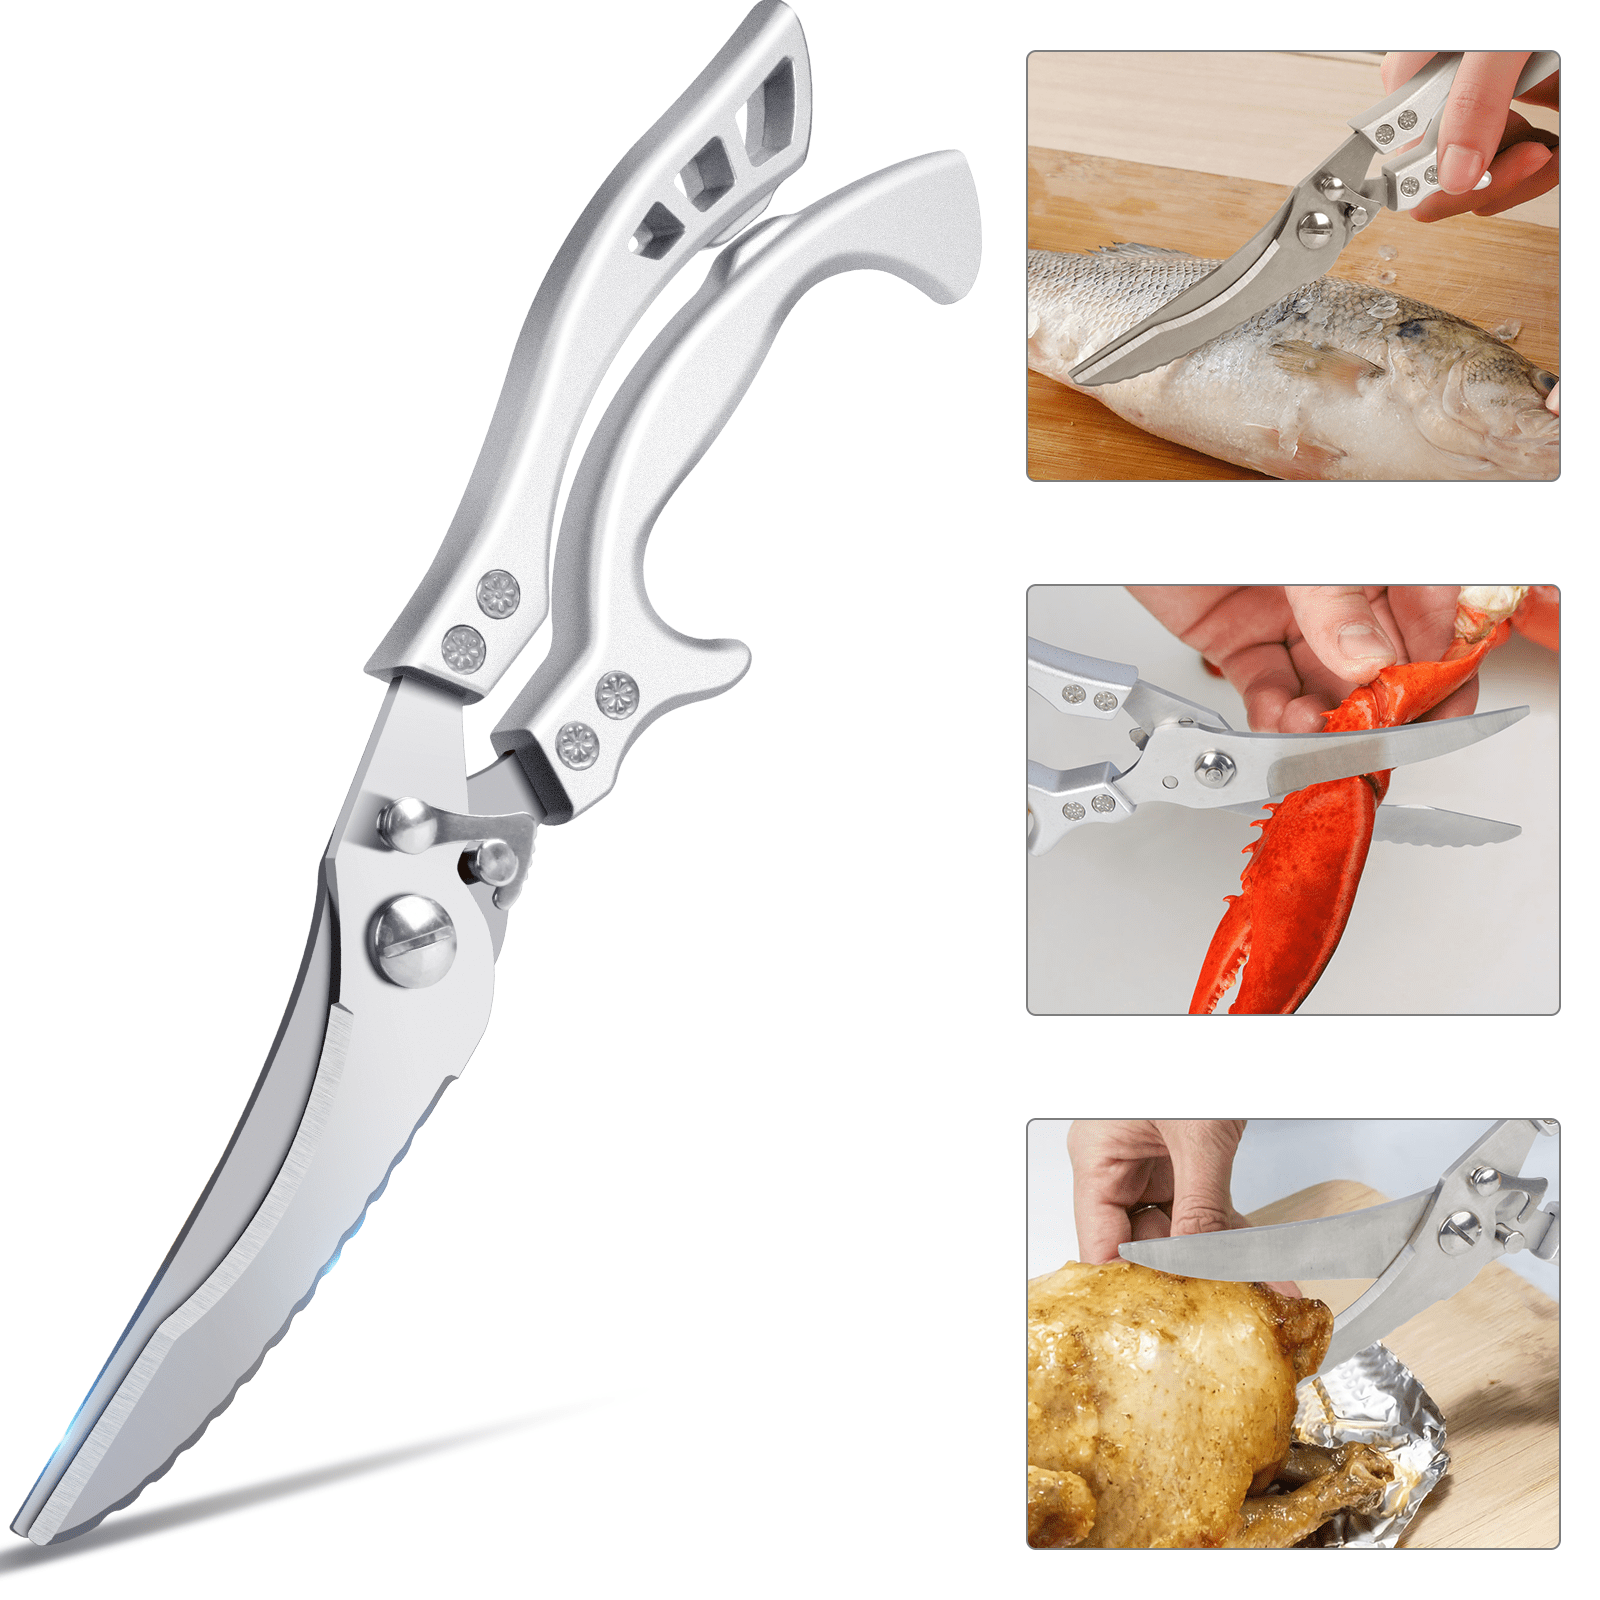  Kitchen Shears Scissor & Cooking Scissors - Sharp Blades,  Professional Stainless Steel Scissors for Food Meat Poultry Vegetable -  Dishwasher Safe - All-Purpose Chef's Tool… : Home & Kitchen